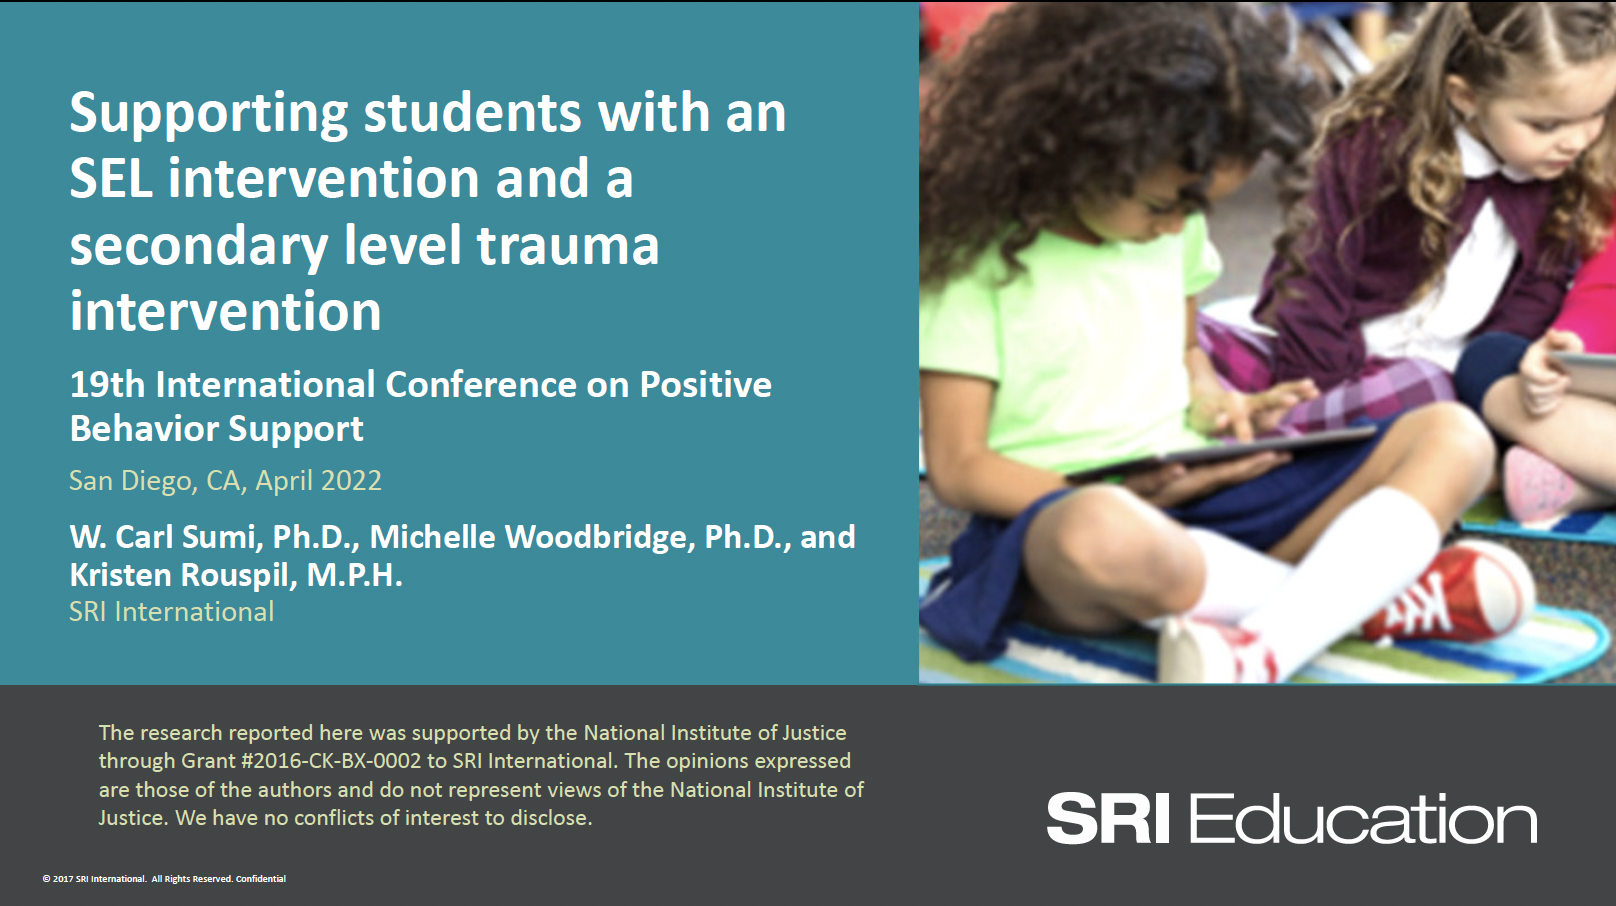 Supporting Students with an SEL Intervention and a Secondary Level Trauma Intervention